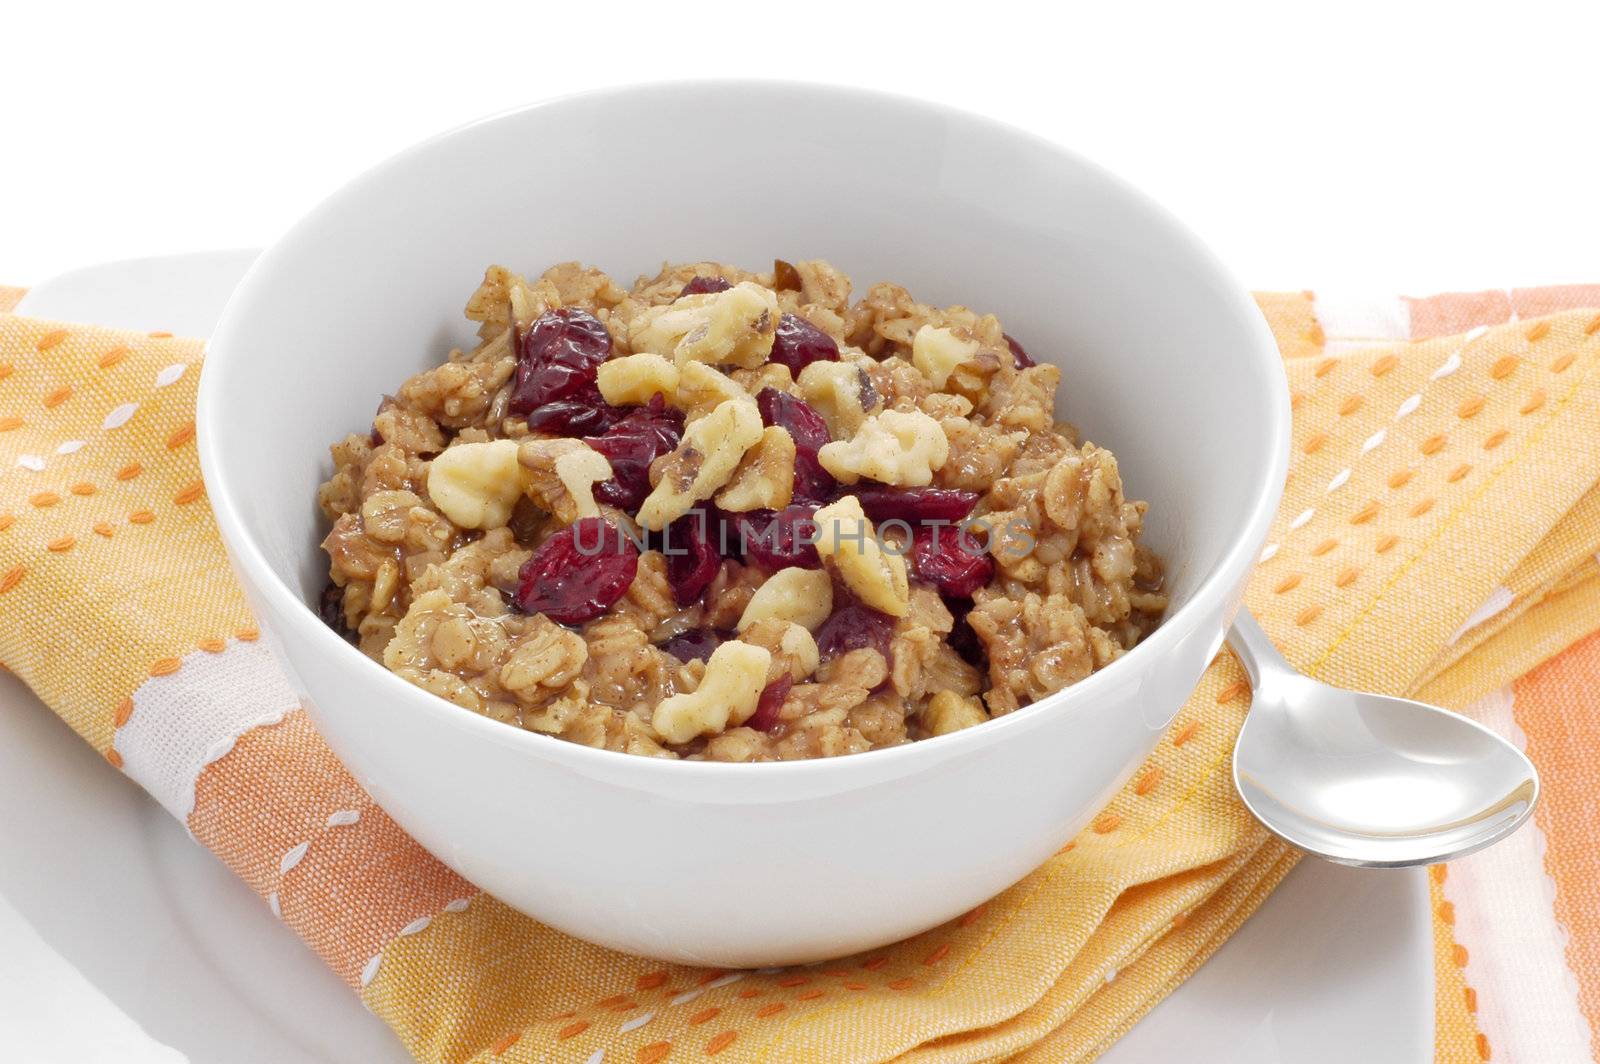 Bowl of oatmeal with dried fruit and nuts.